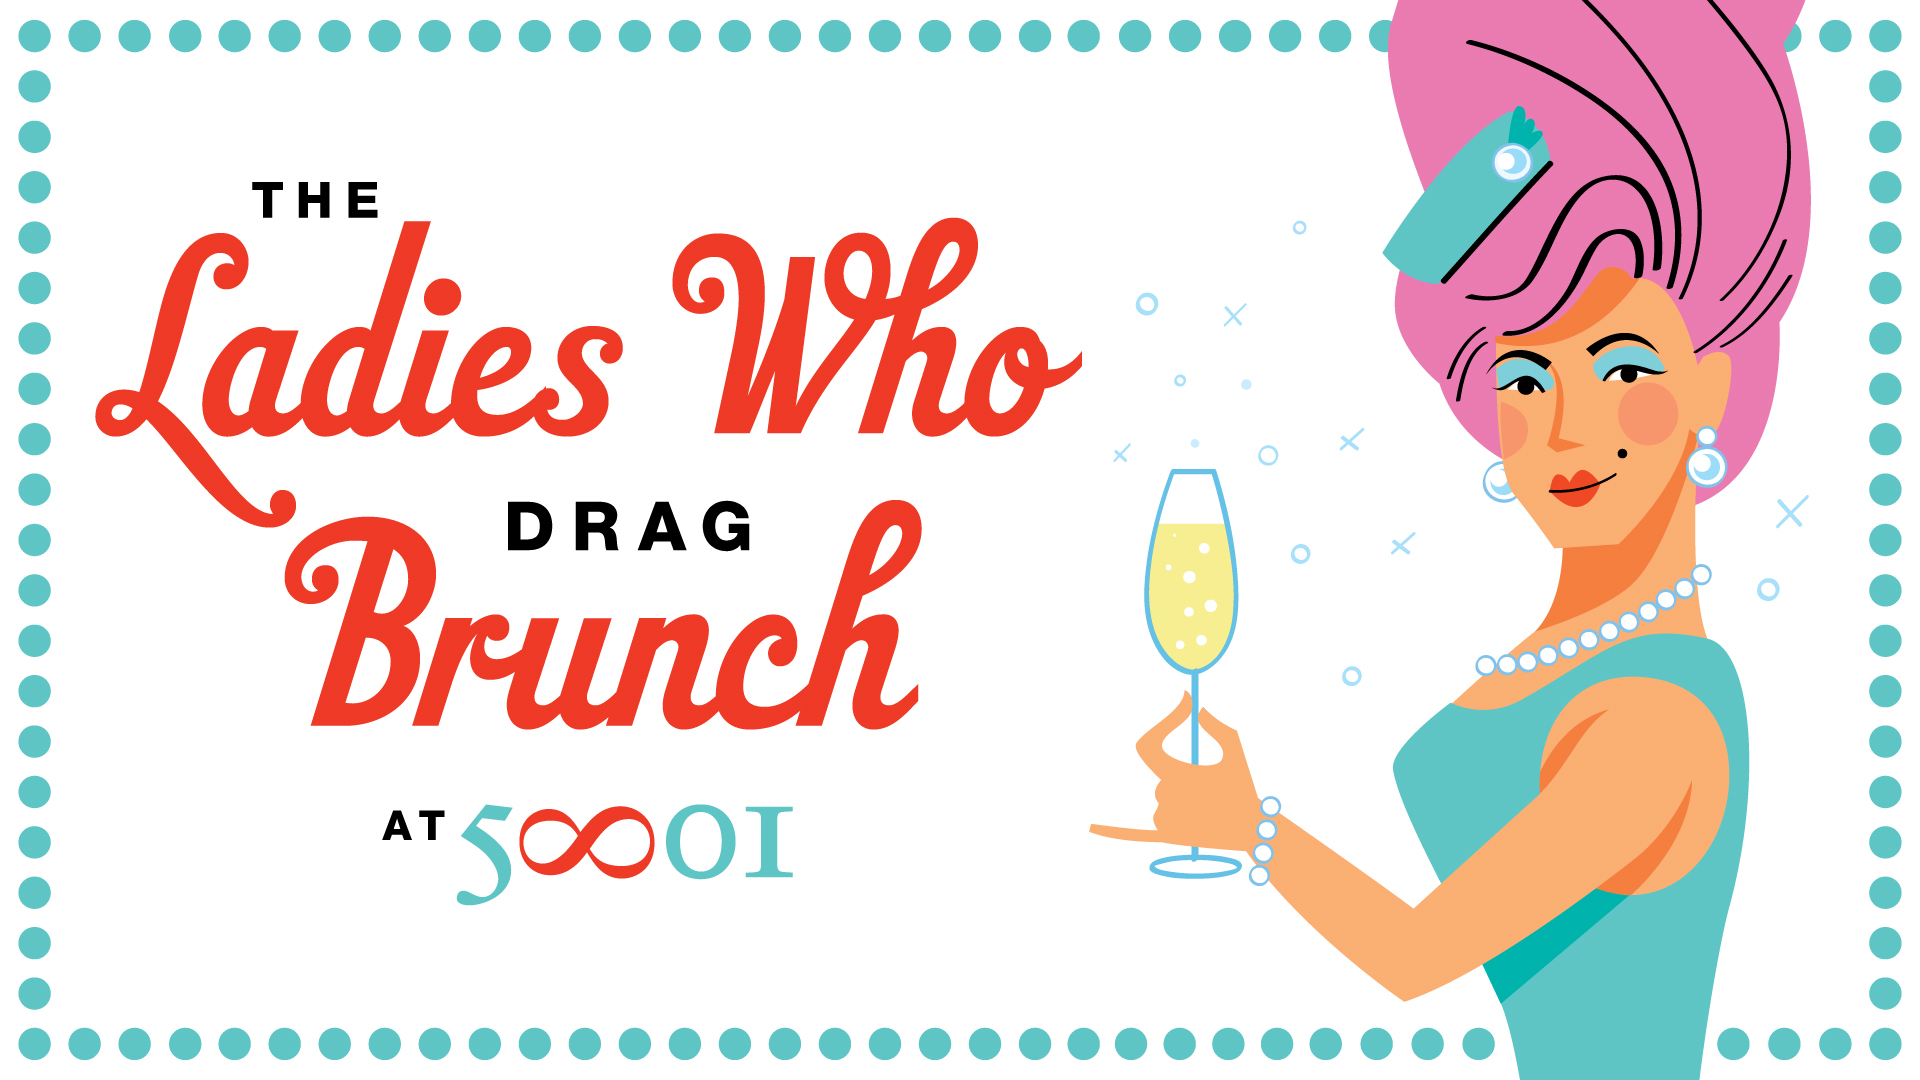 The Ladies Who Drag Brunch